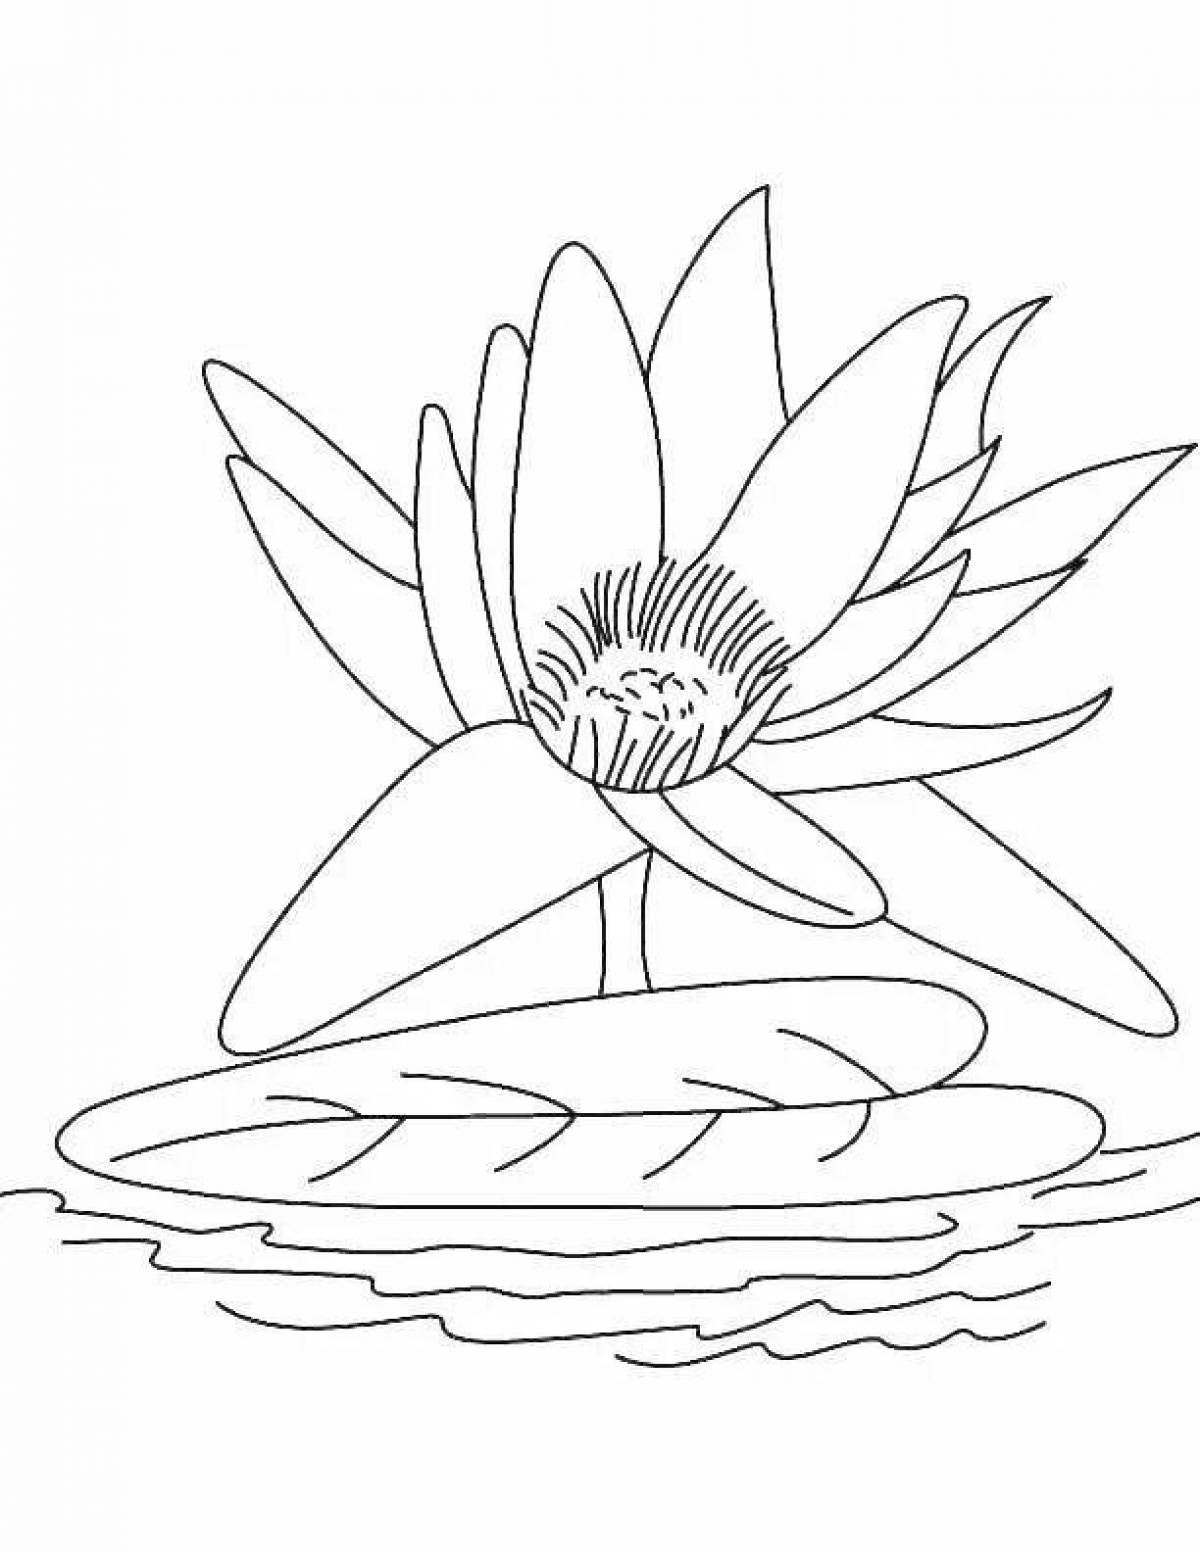 Gorgeous white water lily coloring book